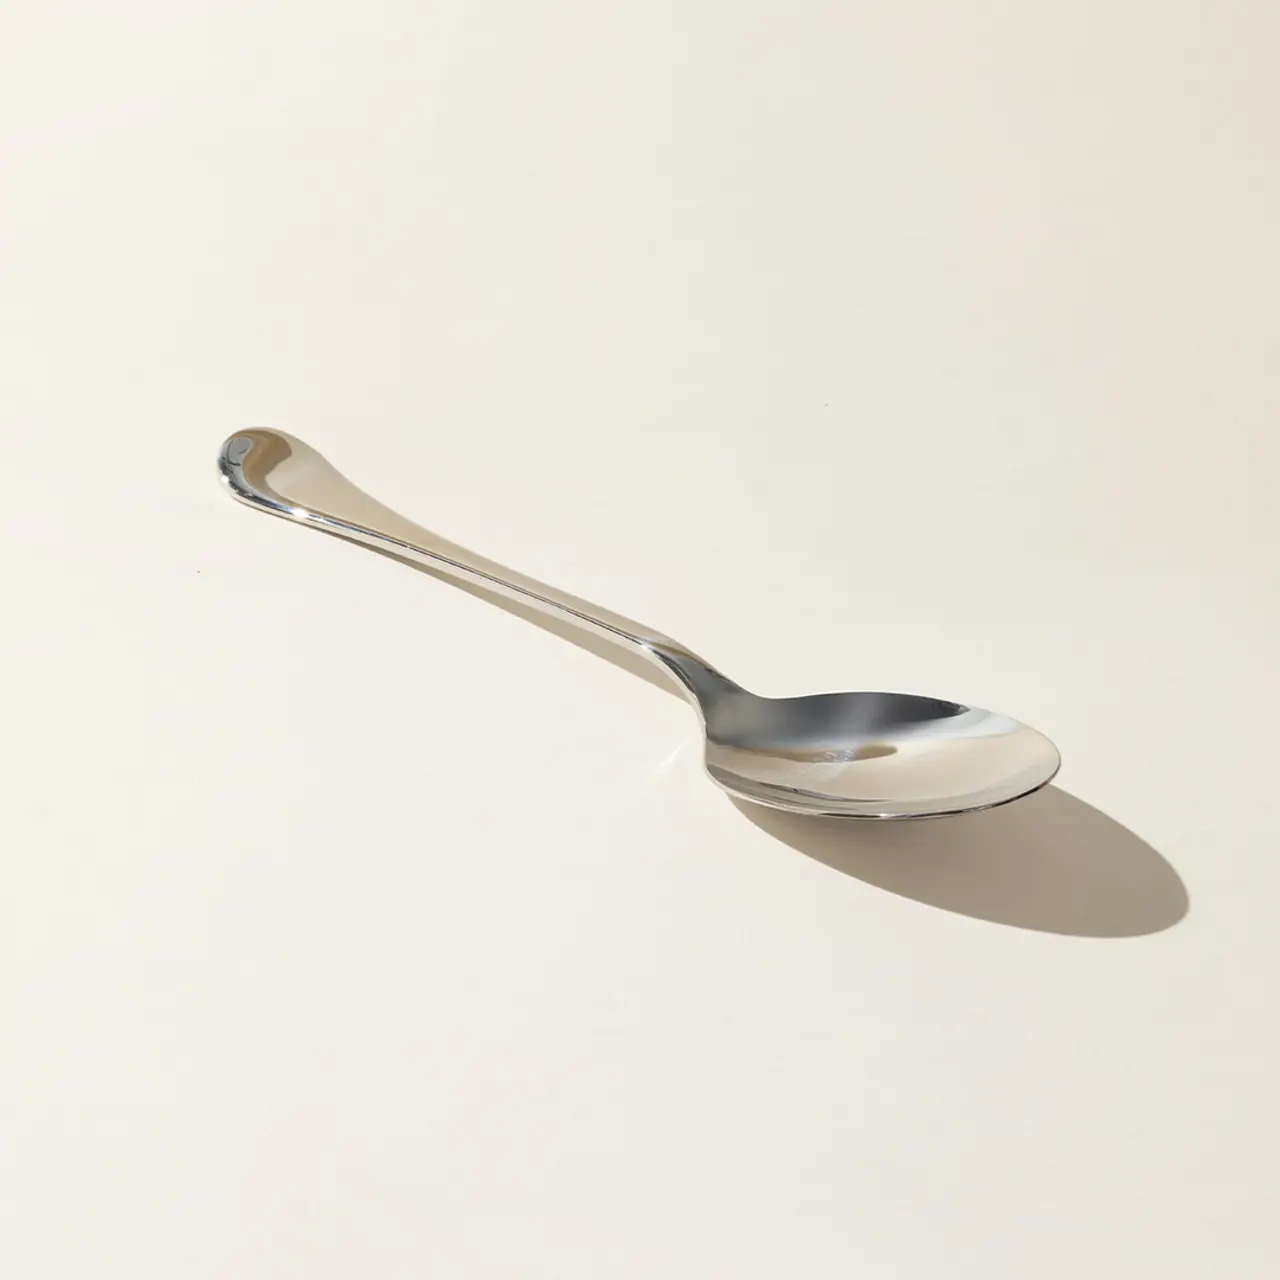 A silver spoon casting a shadow on a light surface.